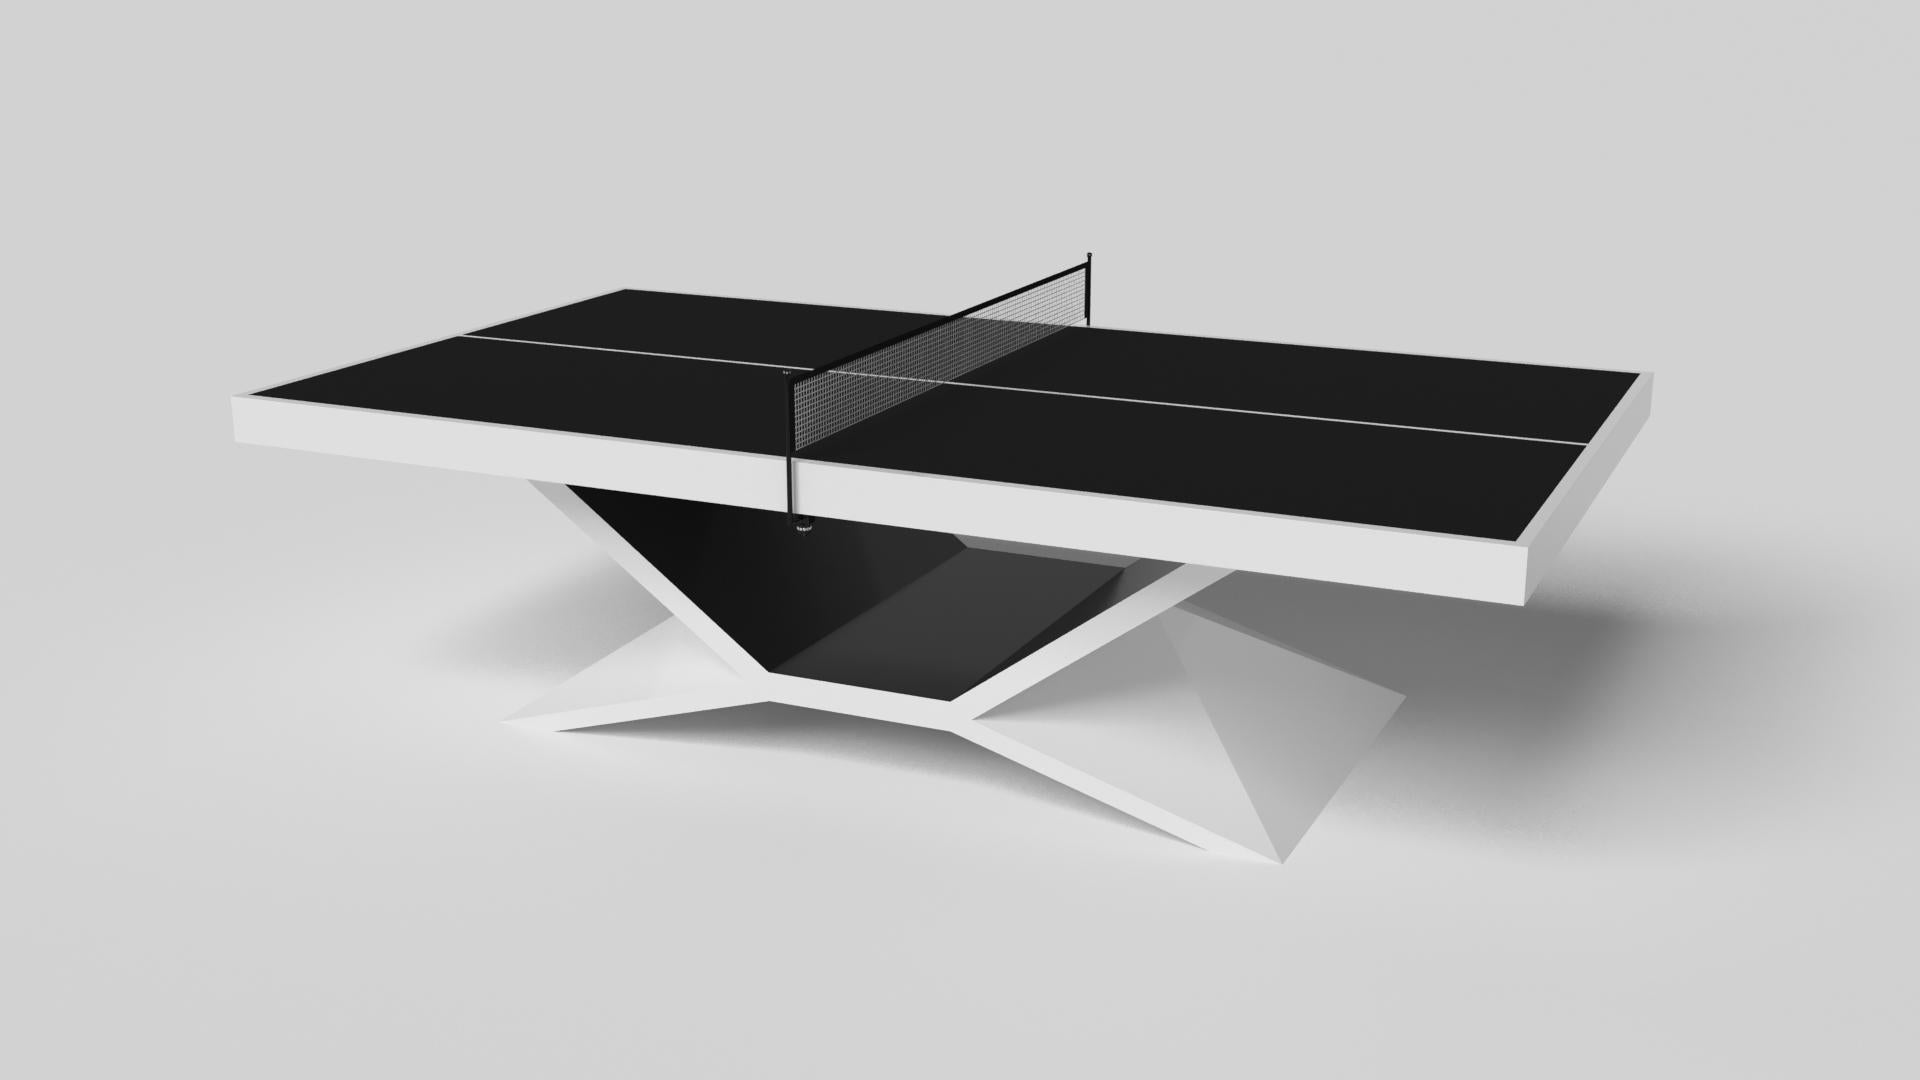 In chrome, the Kors table tennis table is a superior example of contrasting geometric forms. This table features an angular base that highlights the beauty of negative space from the front view. From the side view, it offers a completely different